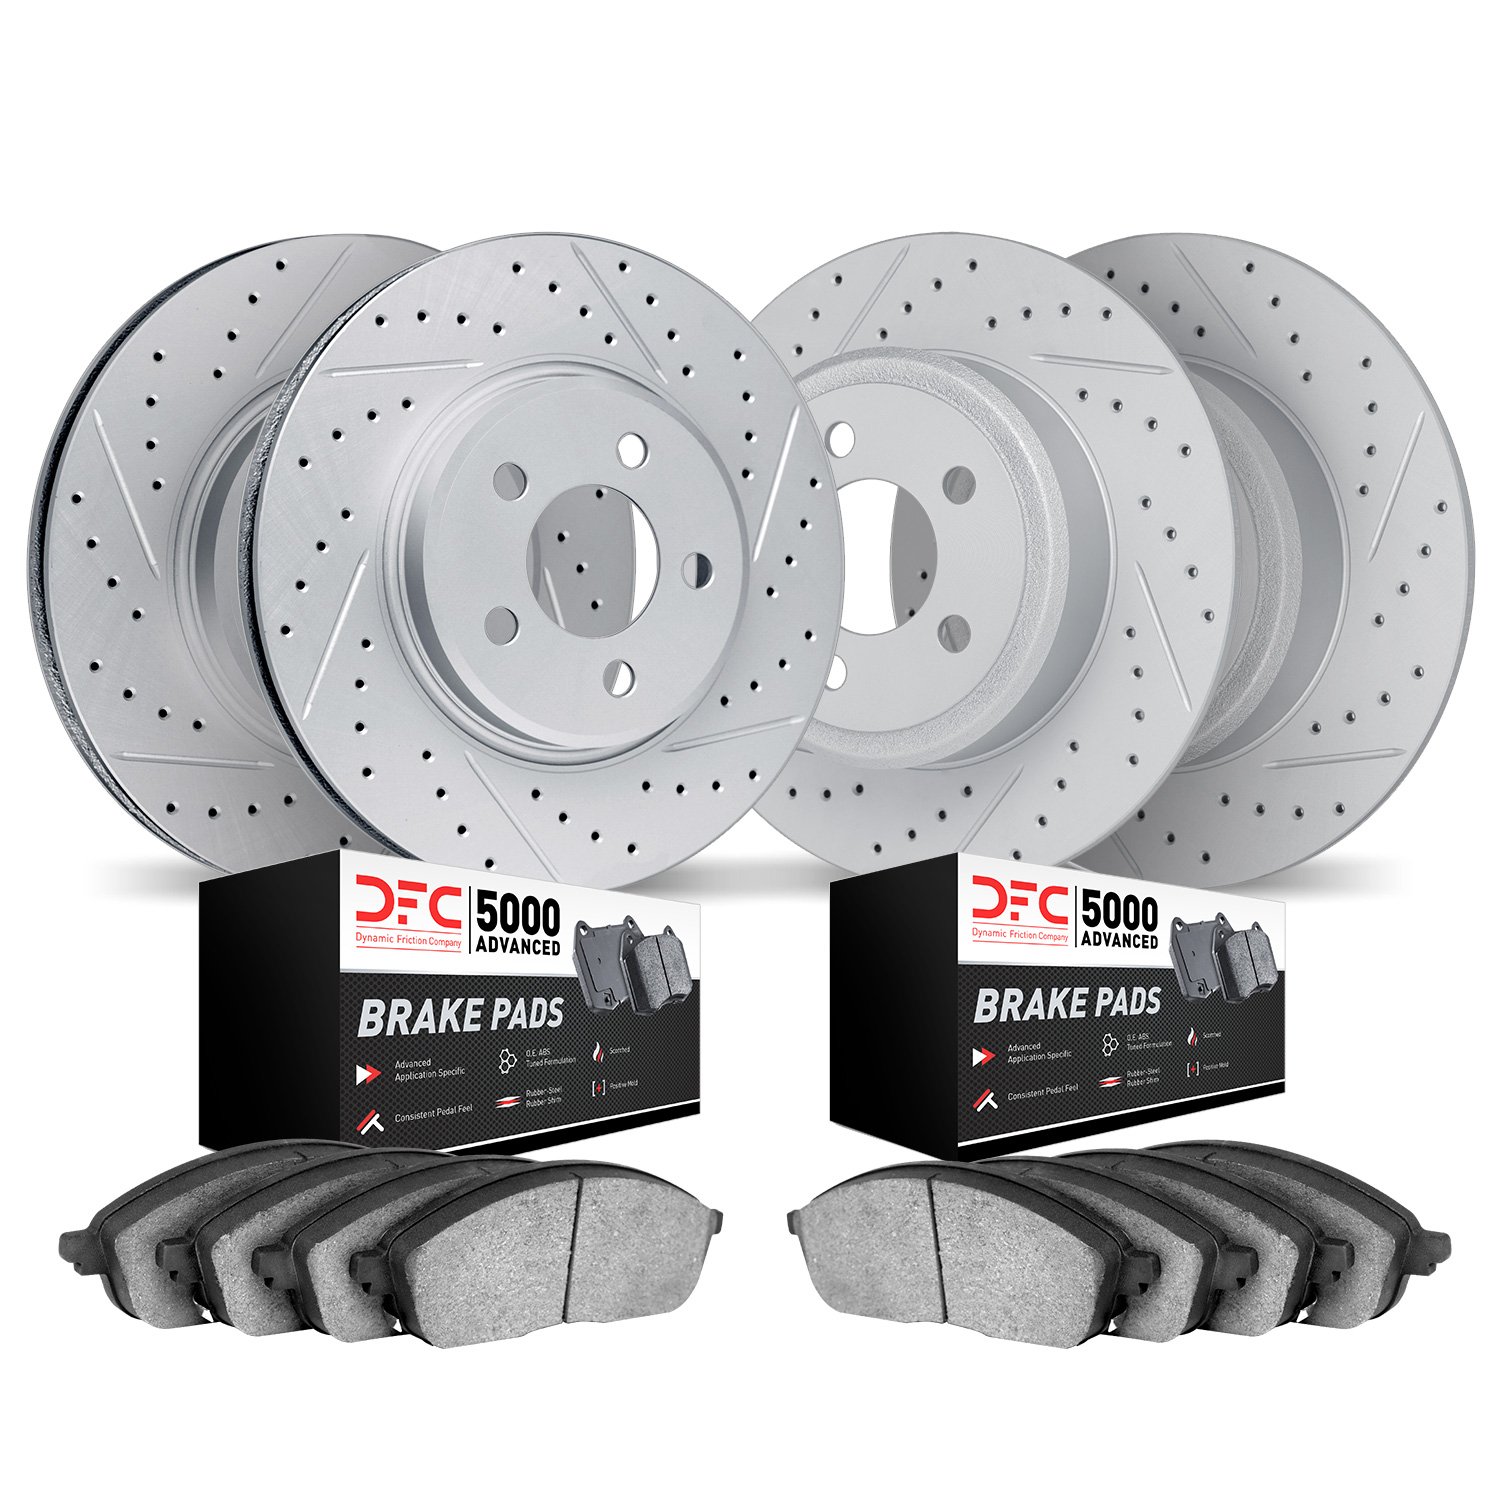 2504-47268 Geoperformance Drilled/Slotted Rotors w/5000 Advanced Brake Pads Kit, Fits Select GM, Position: Front and Rear